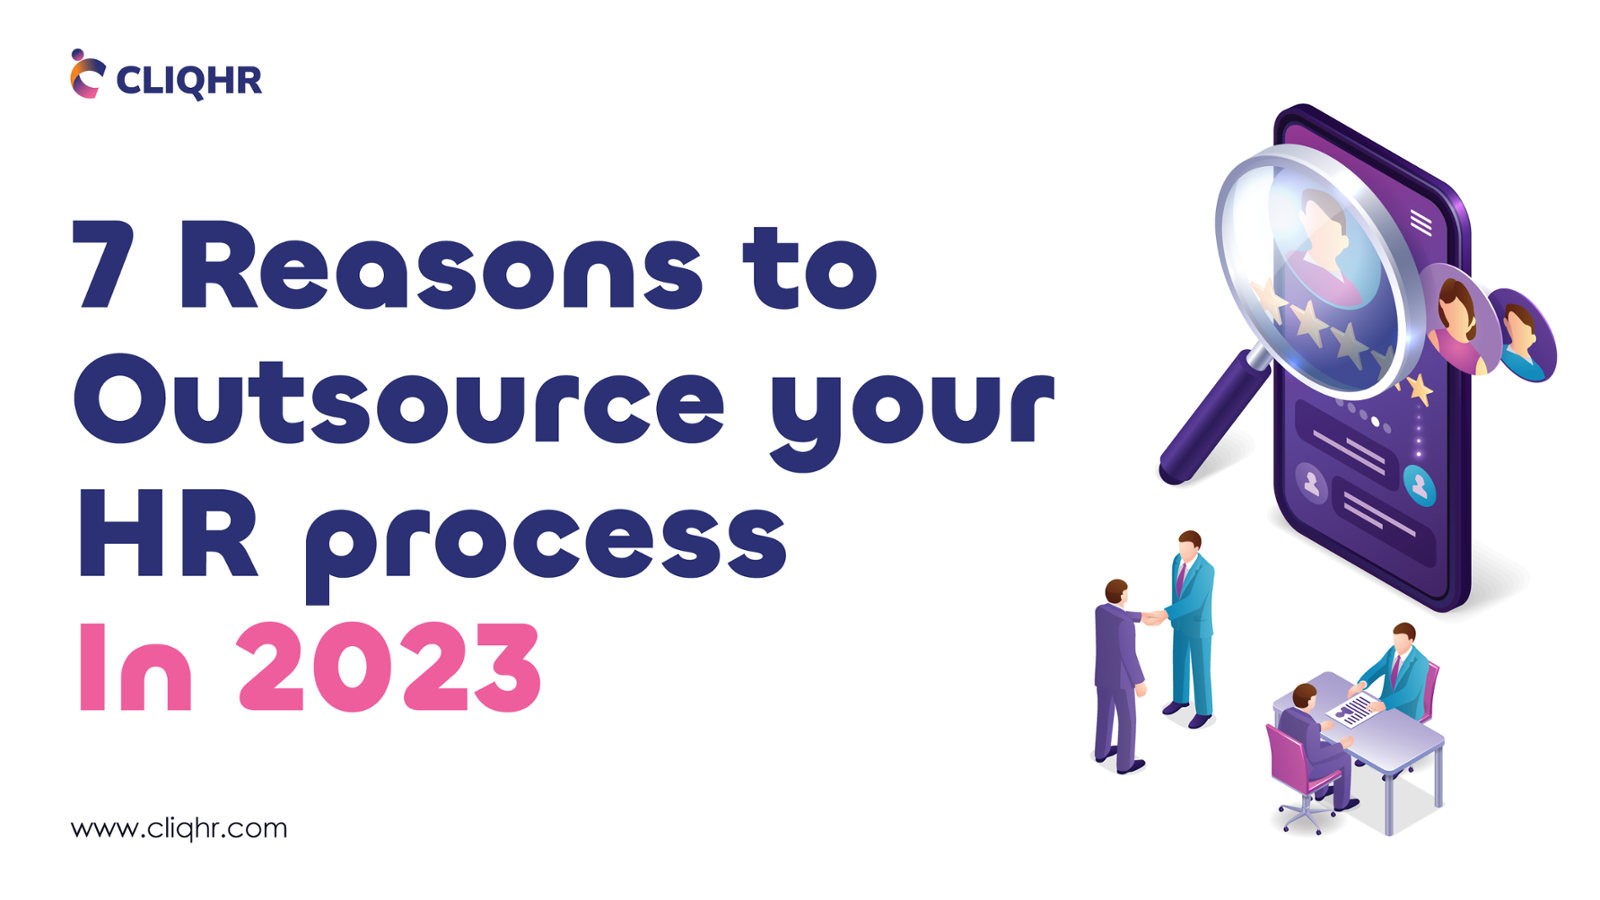 7 reasons to outsource your HR process in 2023